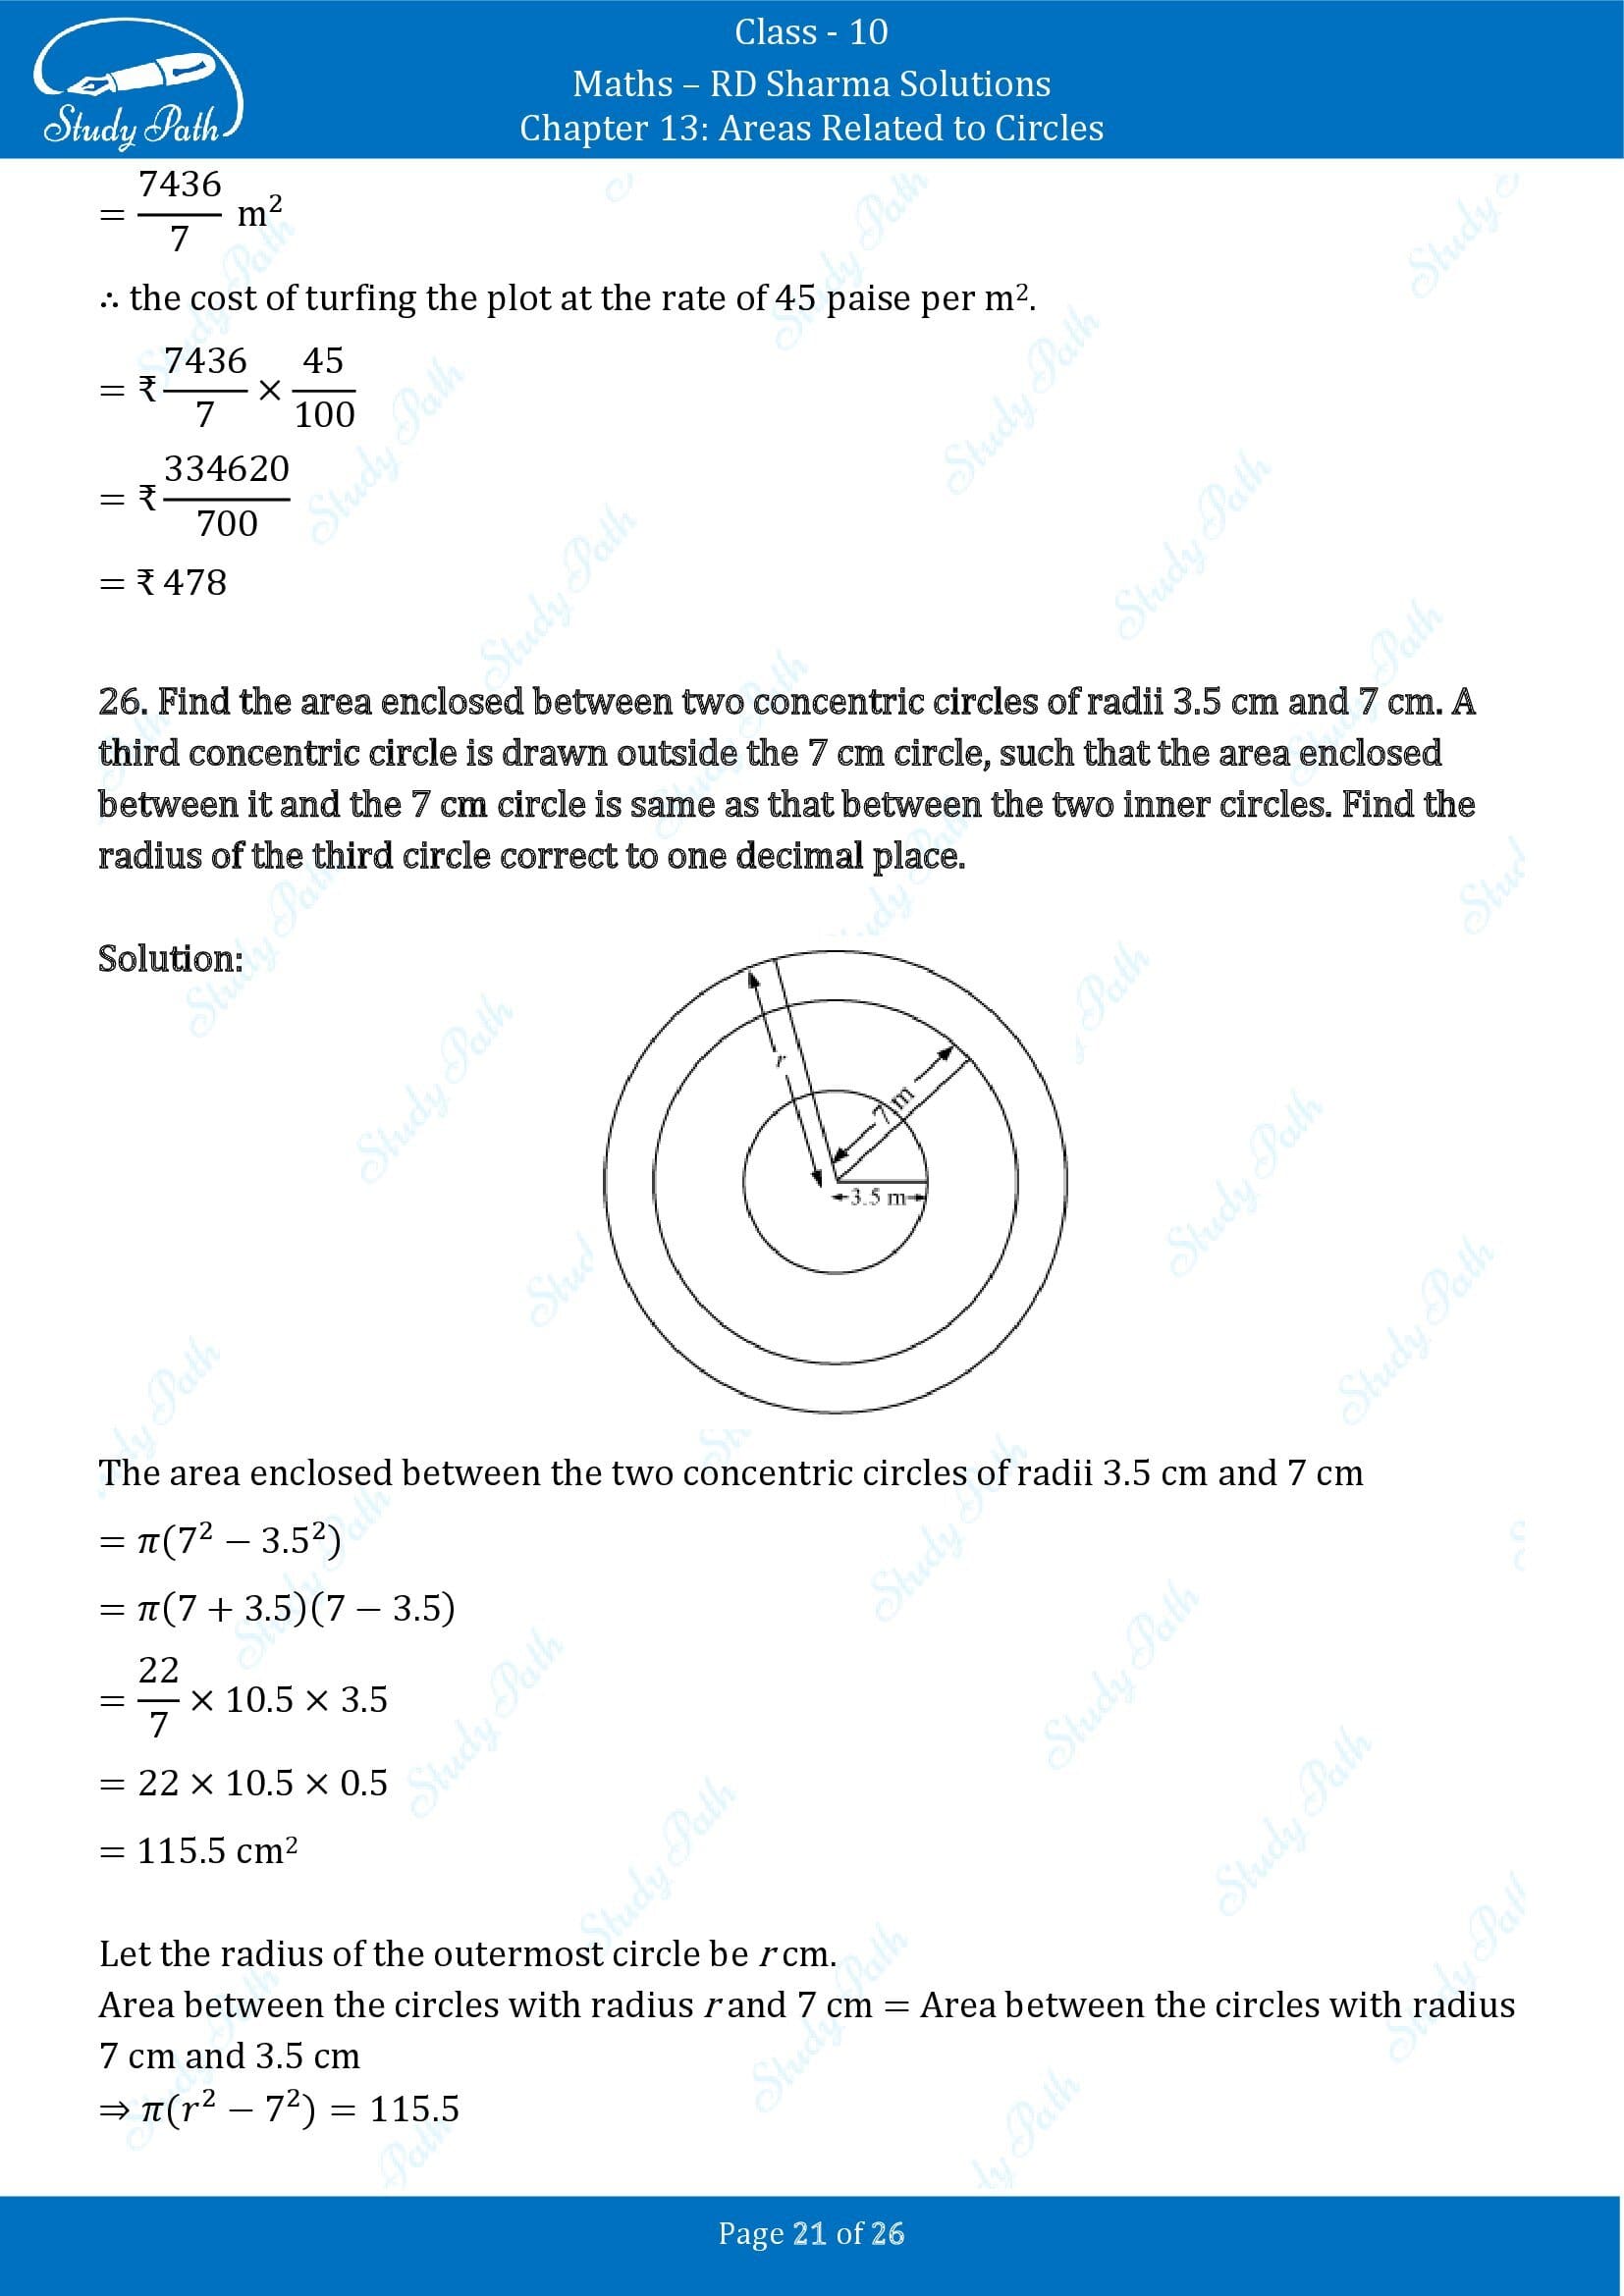 RD Sharma Solutions Class 10 Chapter 13 Areas Related to Circles Exercise 13.1 00021